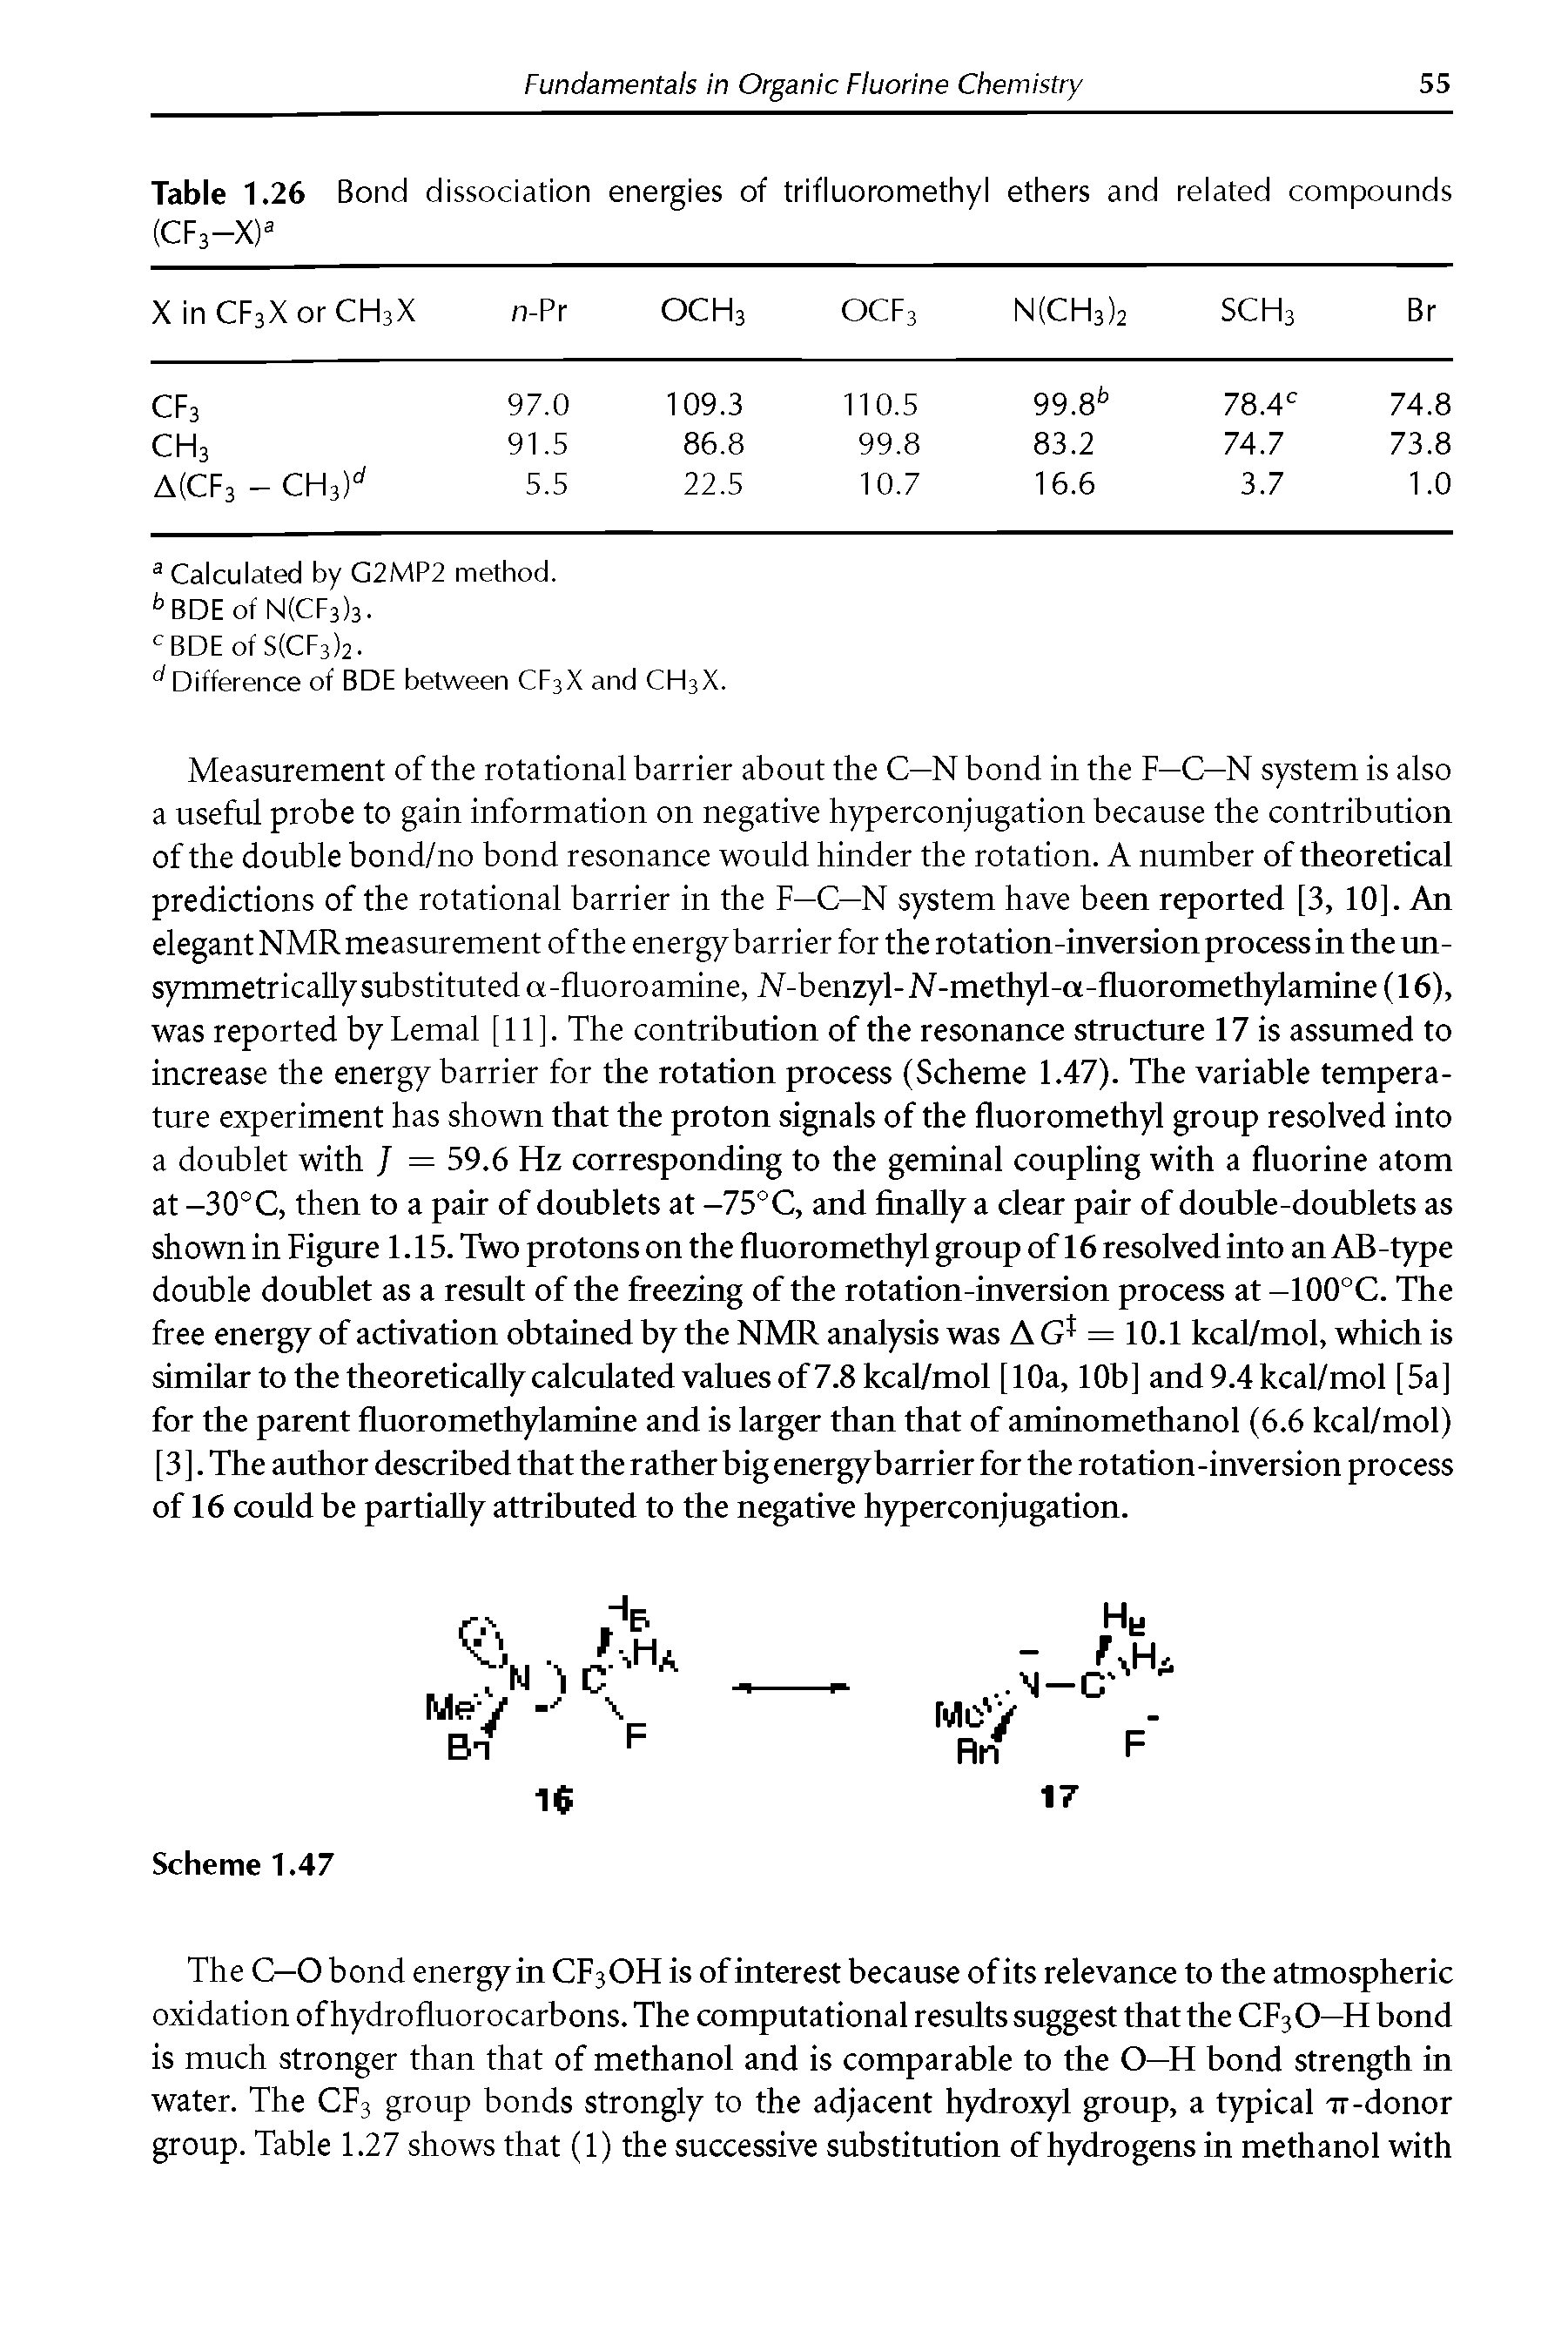 Table 1.26 Bond dissociation energies of trifluoromethyl ethers and related compounds (CF3—X)a...